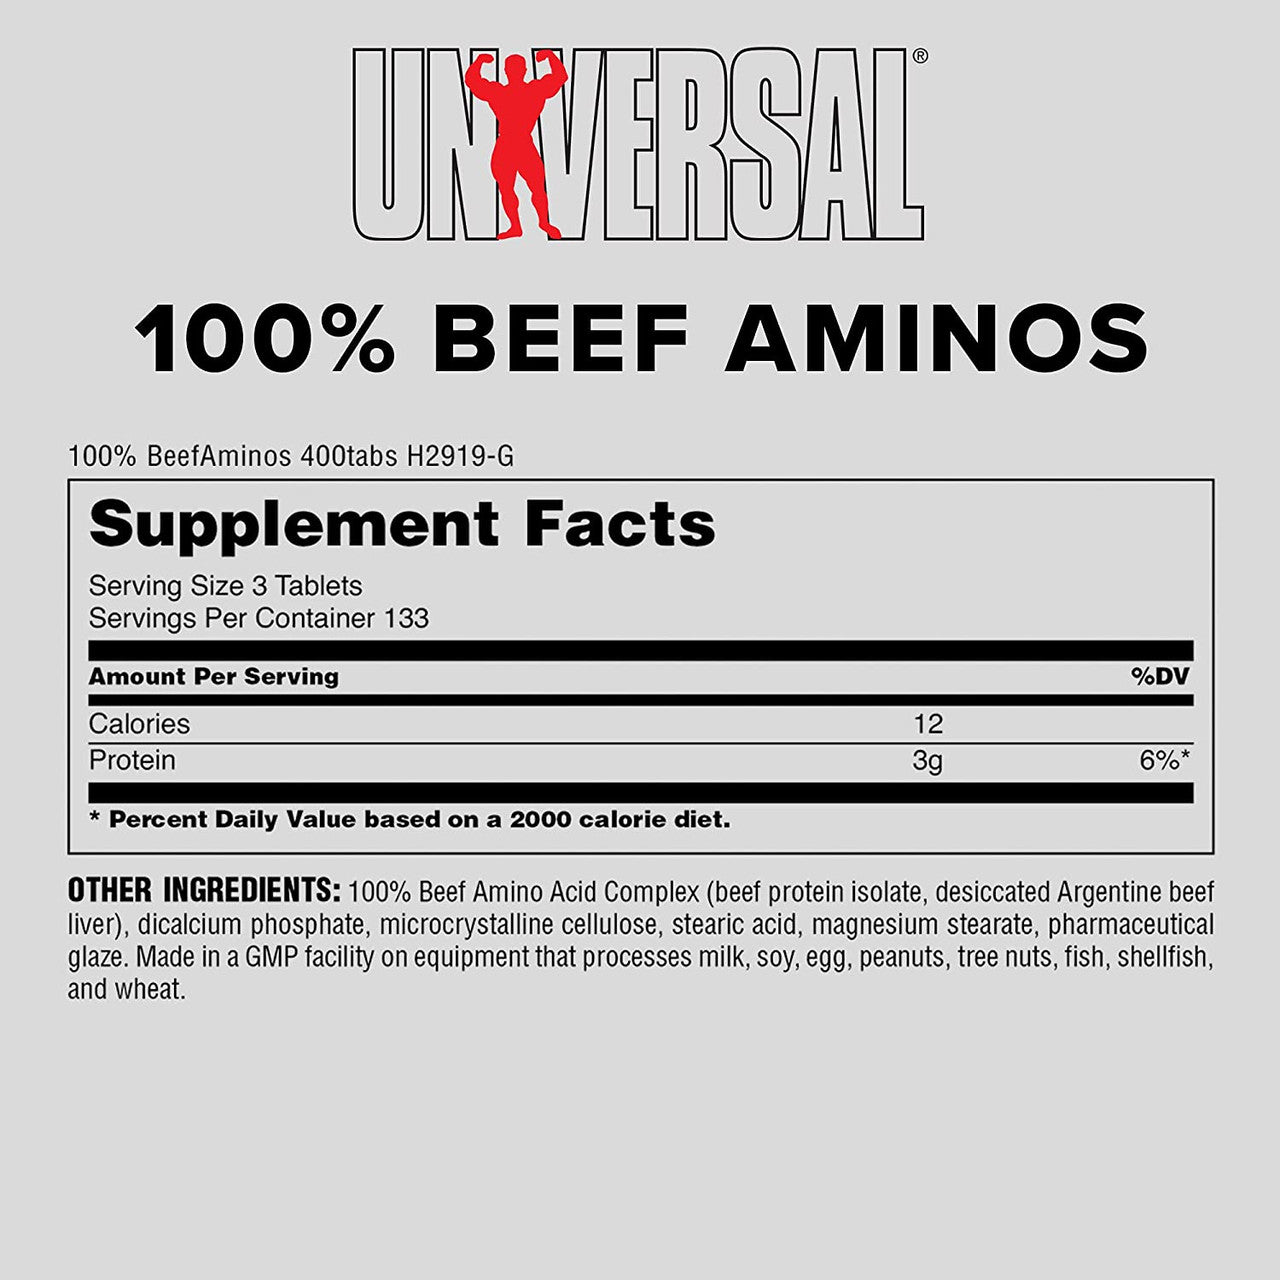 Universal Nutrition 100% Beef Aminos Supplement Facts